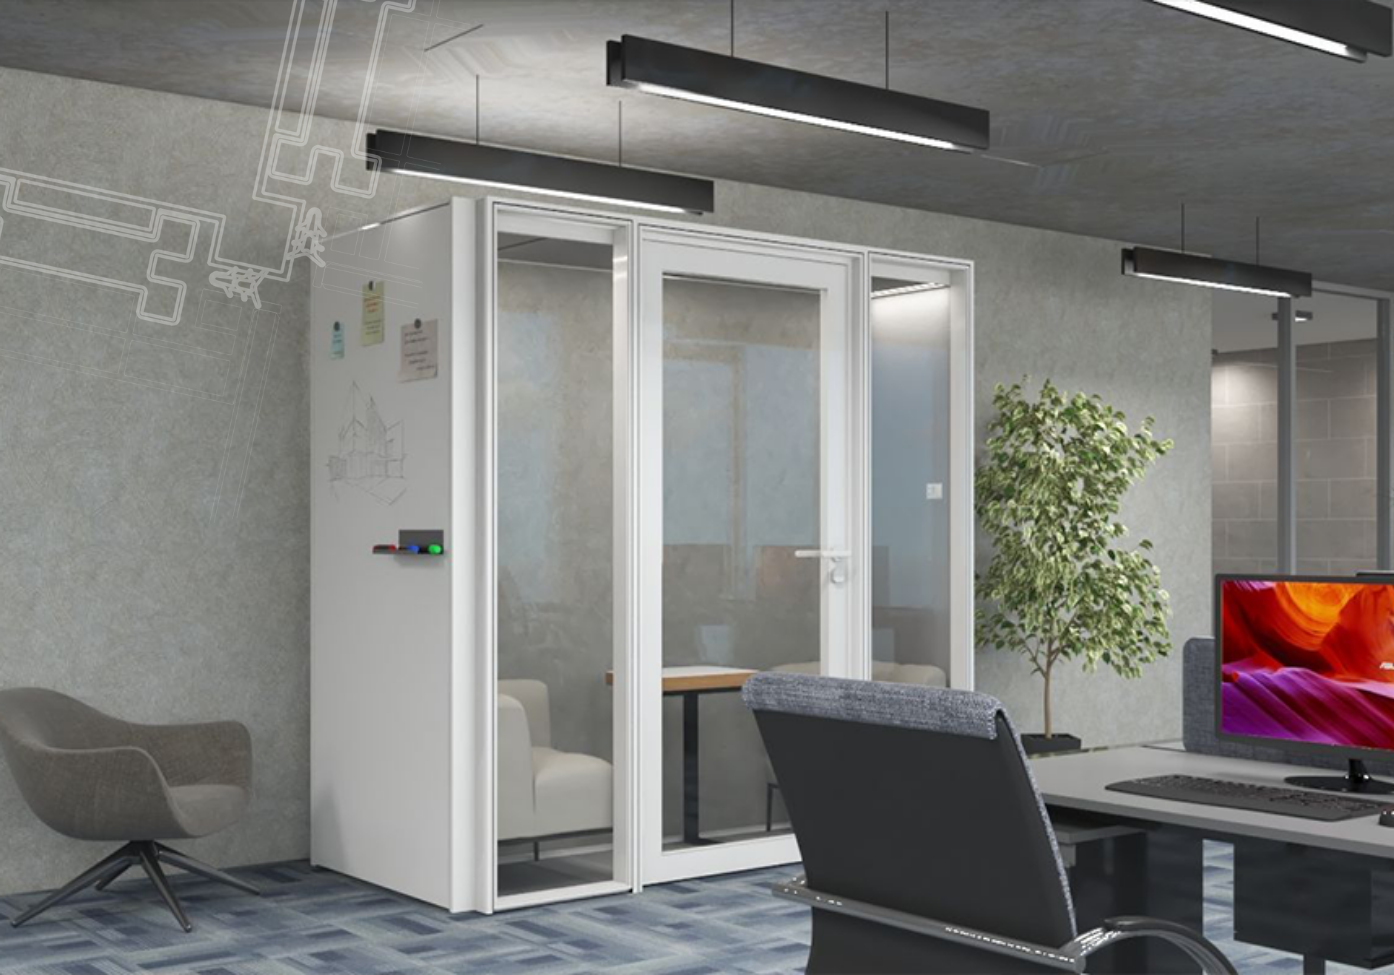 Creating Quiet Spaces in Offices with Alnopod: Acoustic Room and Focus Room Solutions